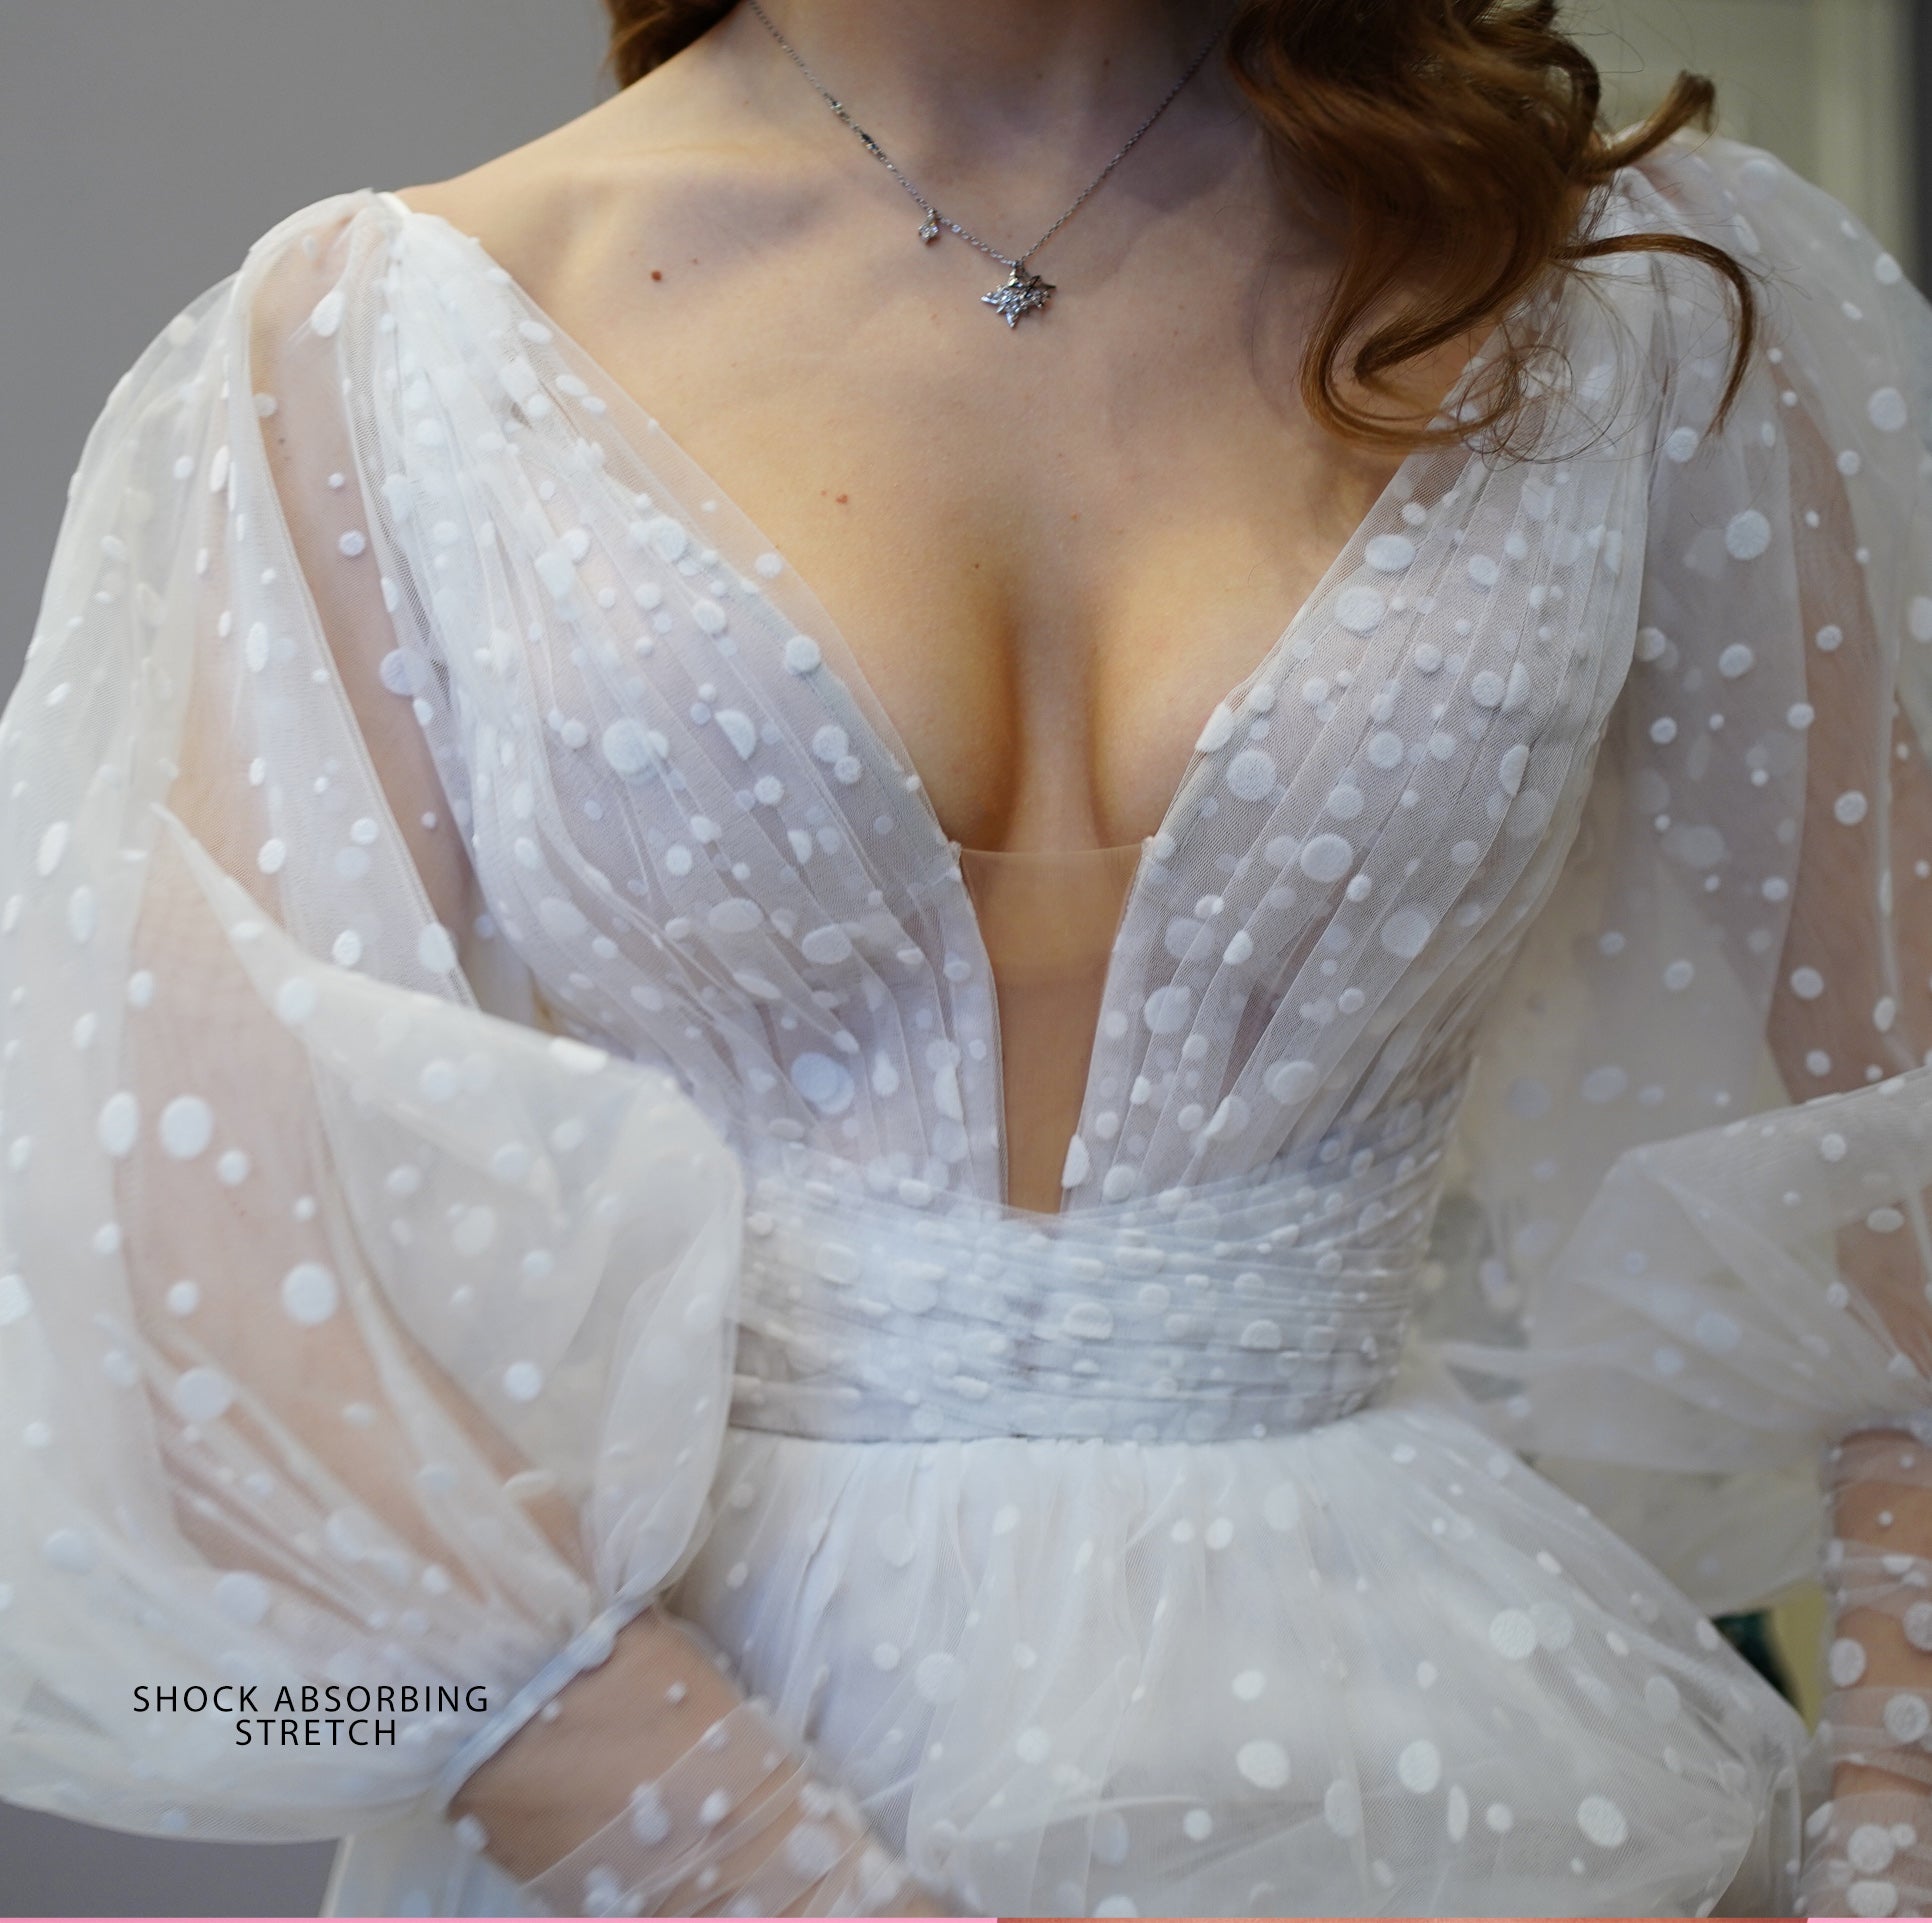 What boob tape is best for a wedding dress?